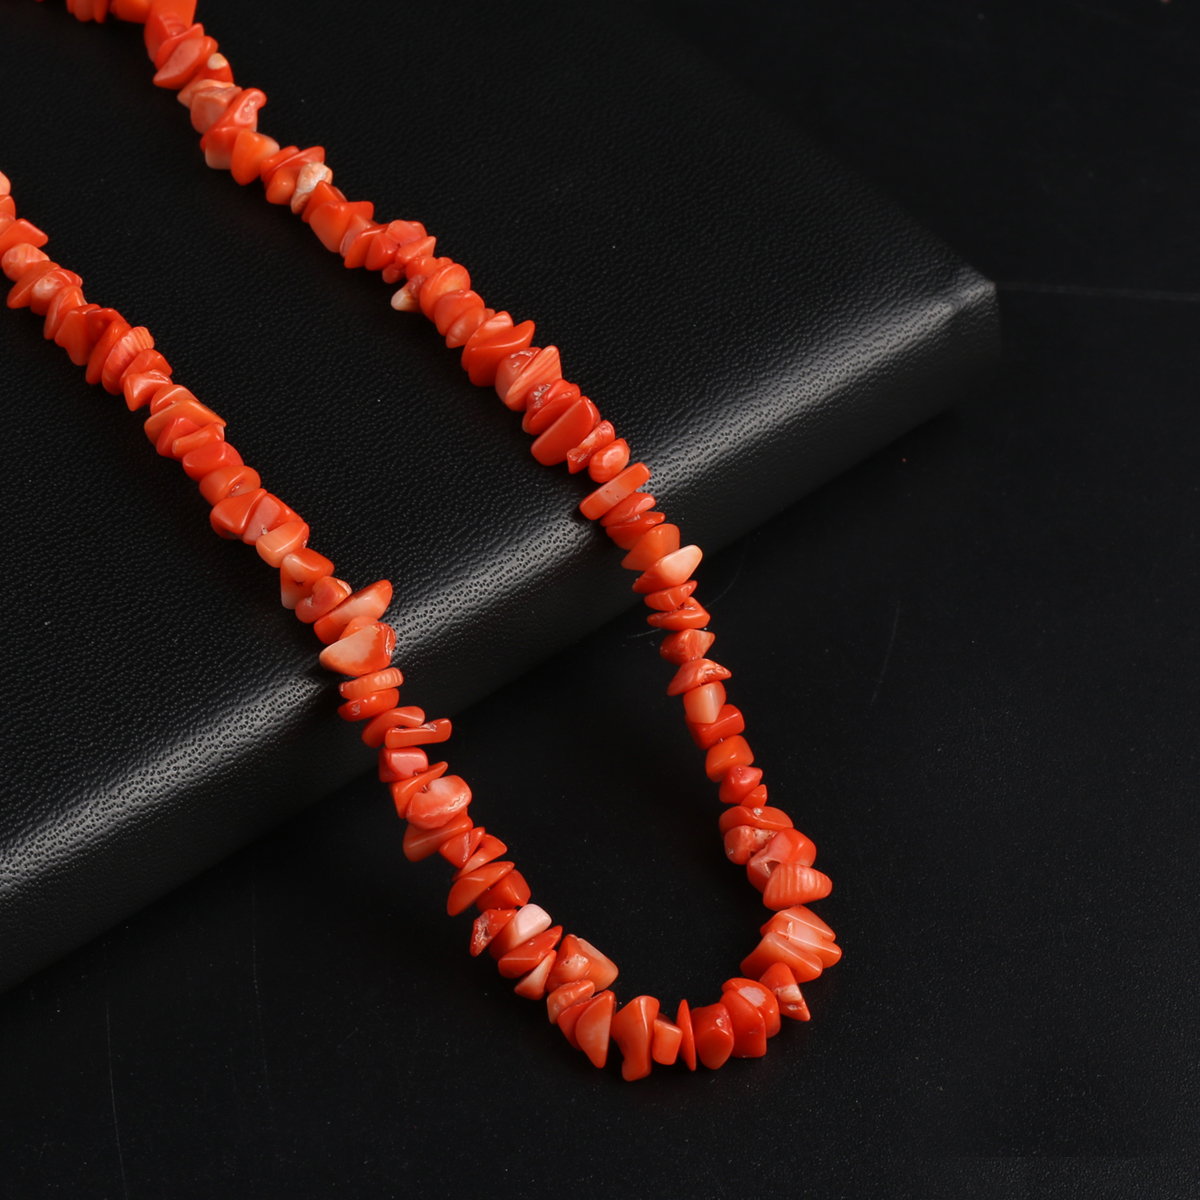 Artificial Coral Beads Sea Bamboo Synthetic Irregular Coral Beads For Jewelry Making DIY Necklace Bracelet Earrings Accessory